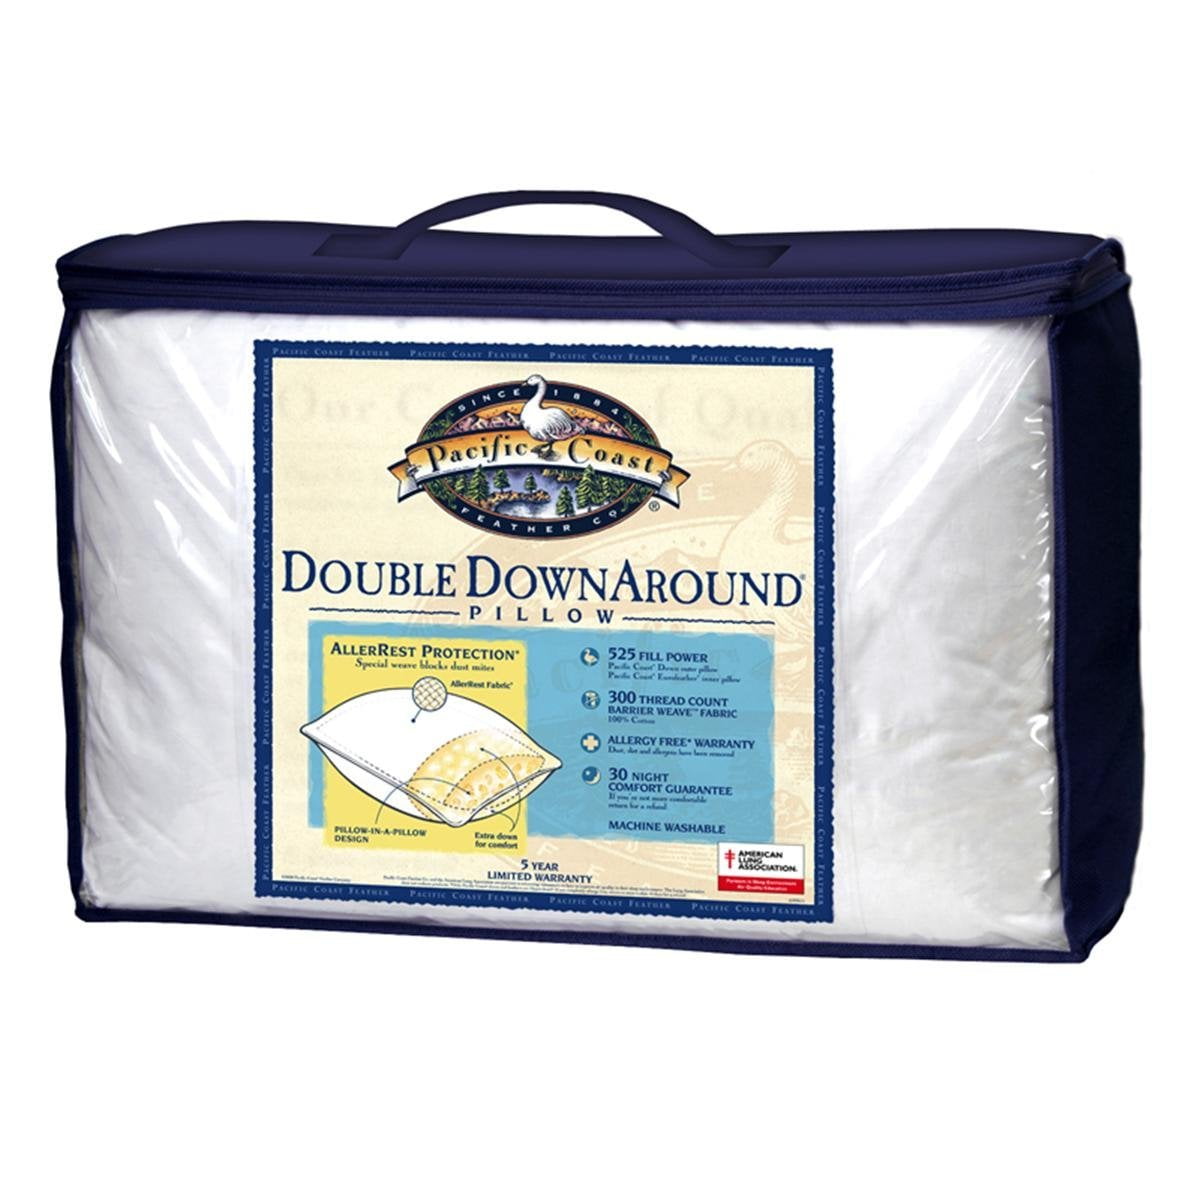 pacific coast double down around pillow